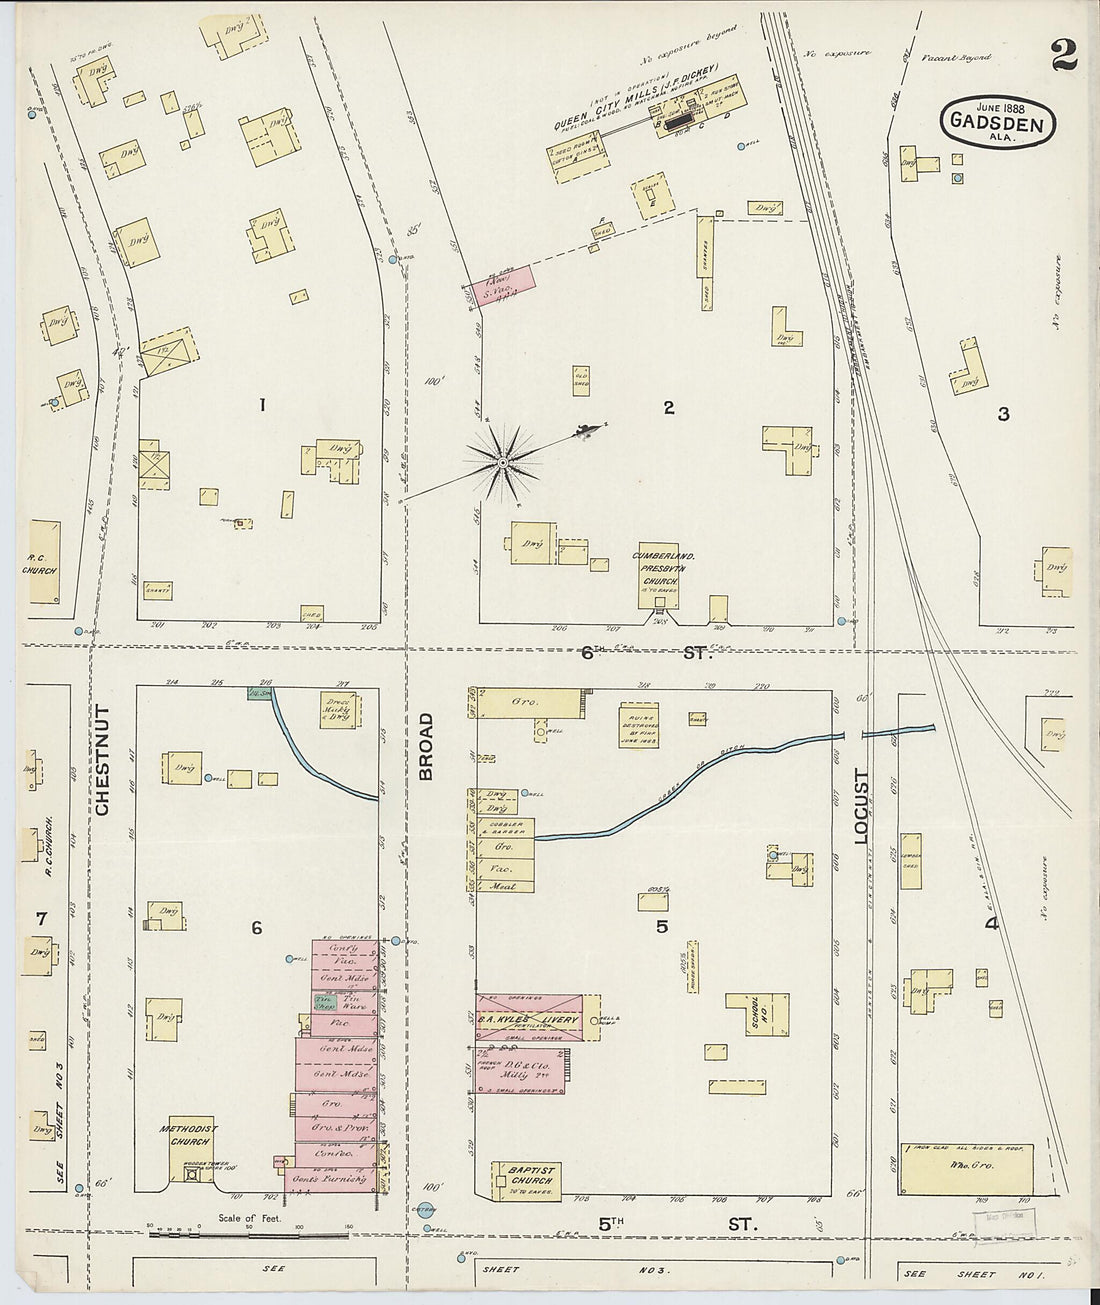 This old map of Gadsden, Etowah County, Alabama was created by Sanborn Map Company in 1888